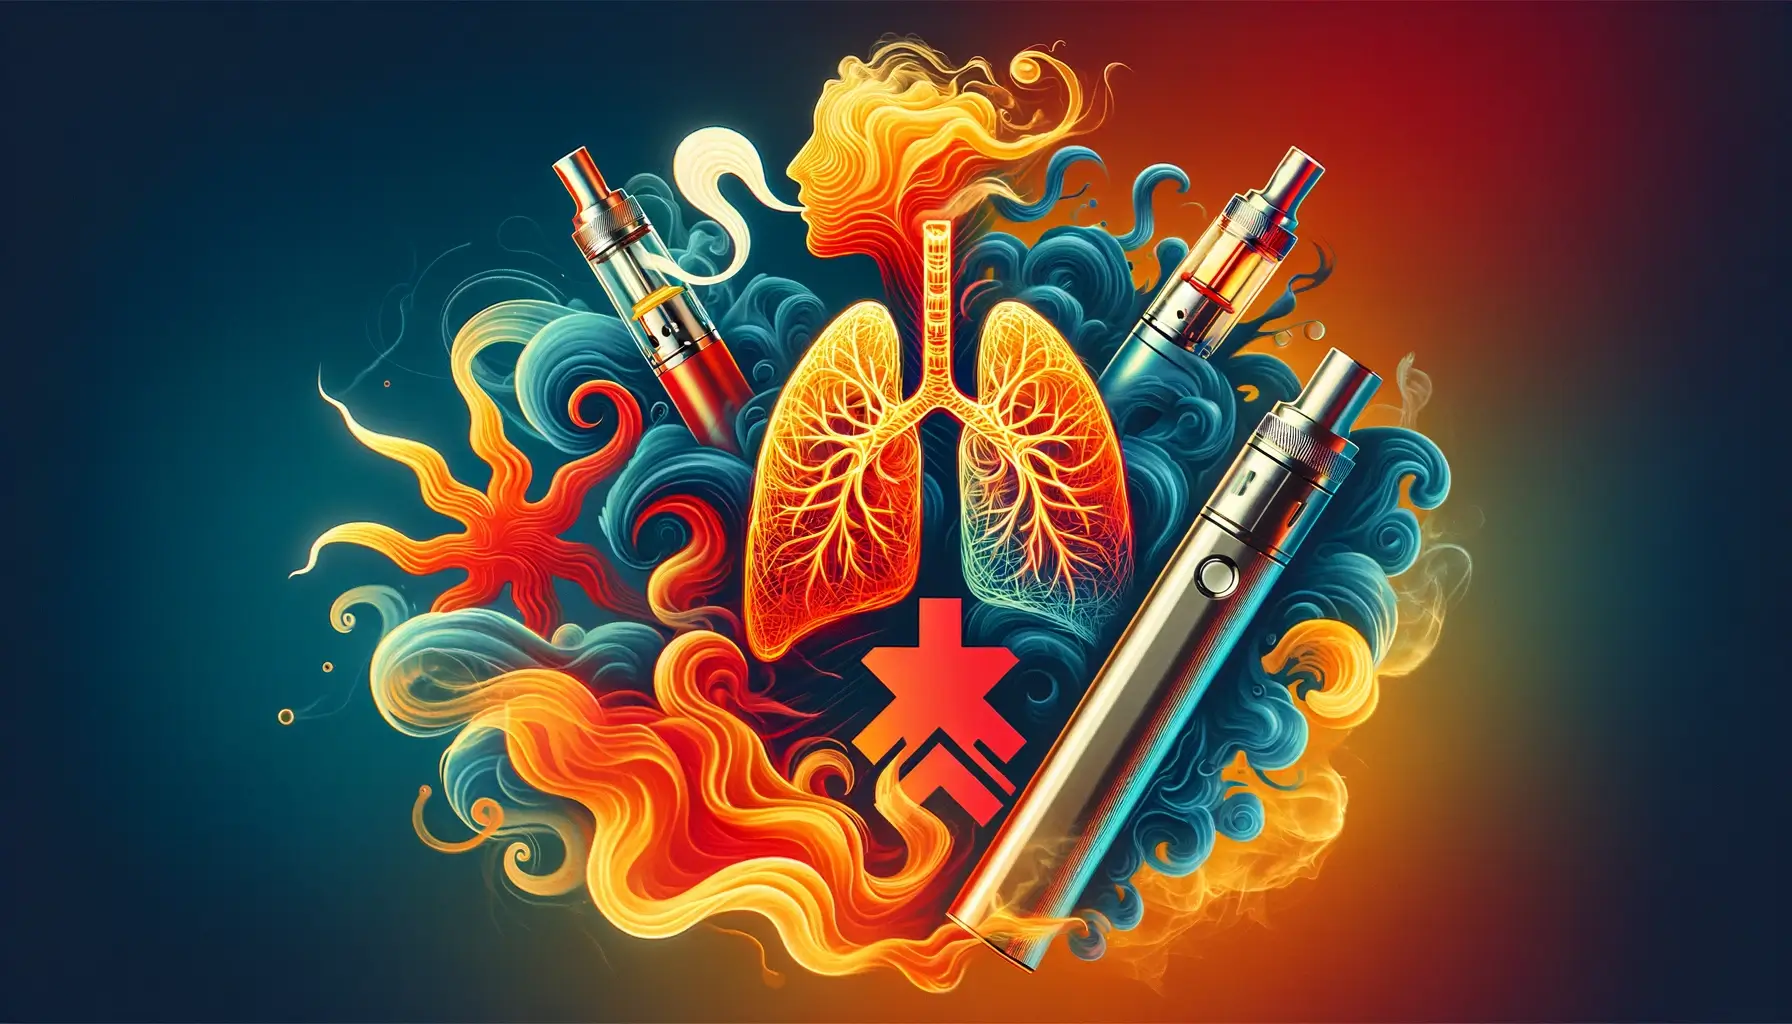 A visually engaging and abstract image representing the concept of caution and health risks associated with smoking, specifically focusing on the potential lung harm from using Delta 8 pens. The image should subtly incorporate visual elements related to vaping or smoking, such as wisps of smoke or a stylized pen, alongside symbols of health or the lungs, like a human silhouette with lung outlines or a medical cross. The colors should be a mix of vibrant and warning tones, such as reds, oranges, and yellows, to draw attention to the cautionary message without directly showing any brand or product.